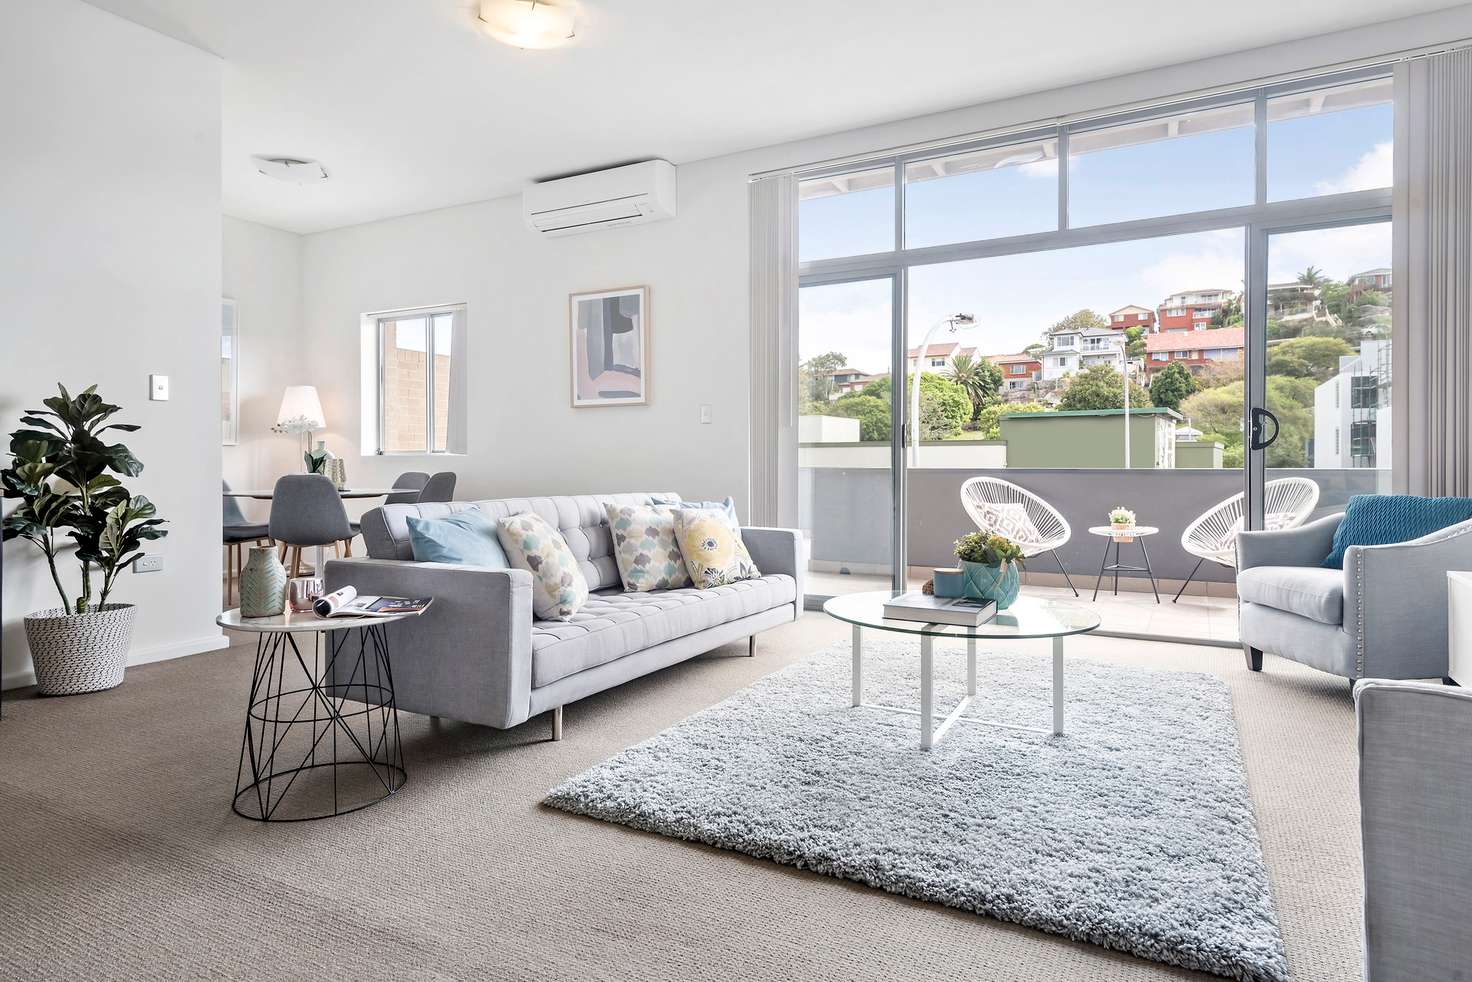 Main view of Homely apartment listing, 27/228 Condamine Street, Manly Vale NSW 2093